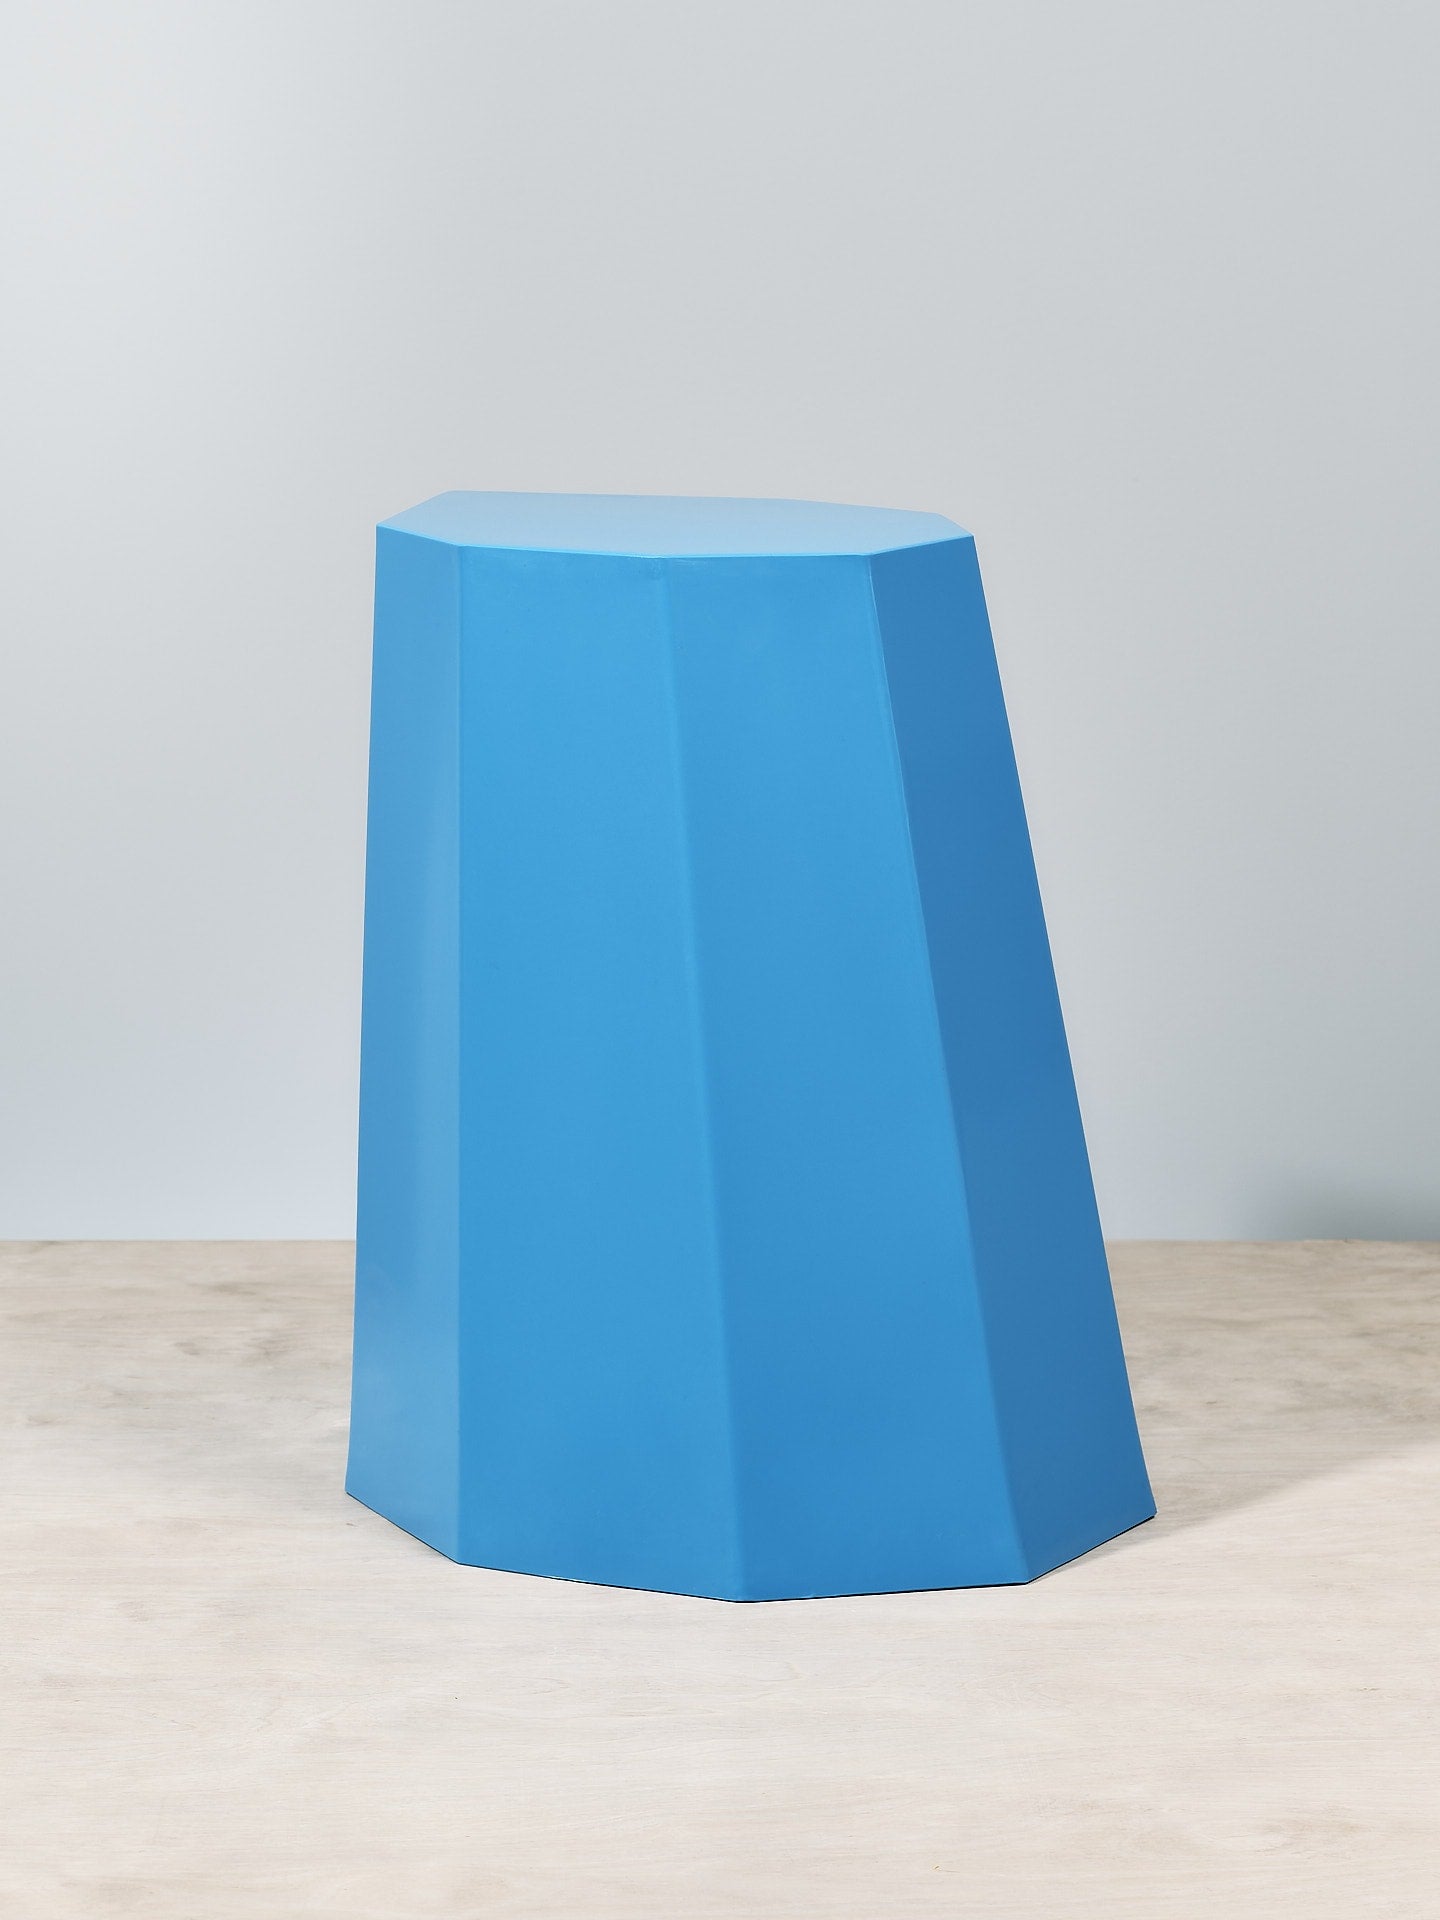 An Arnold Circus Stool – Boat Blue sitting on top of a wooden table. (Martino Gamper)